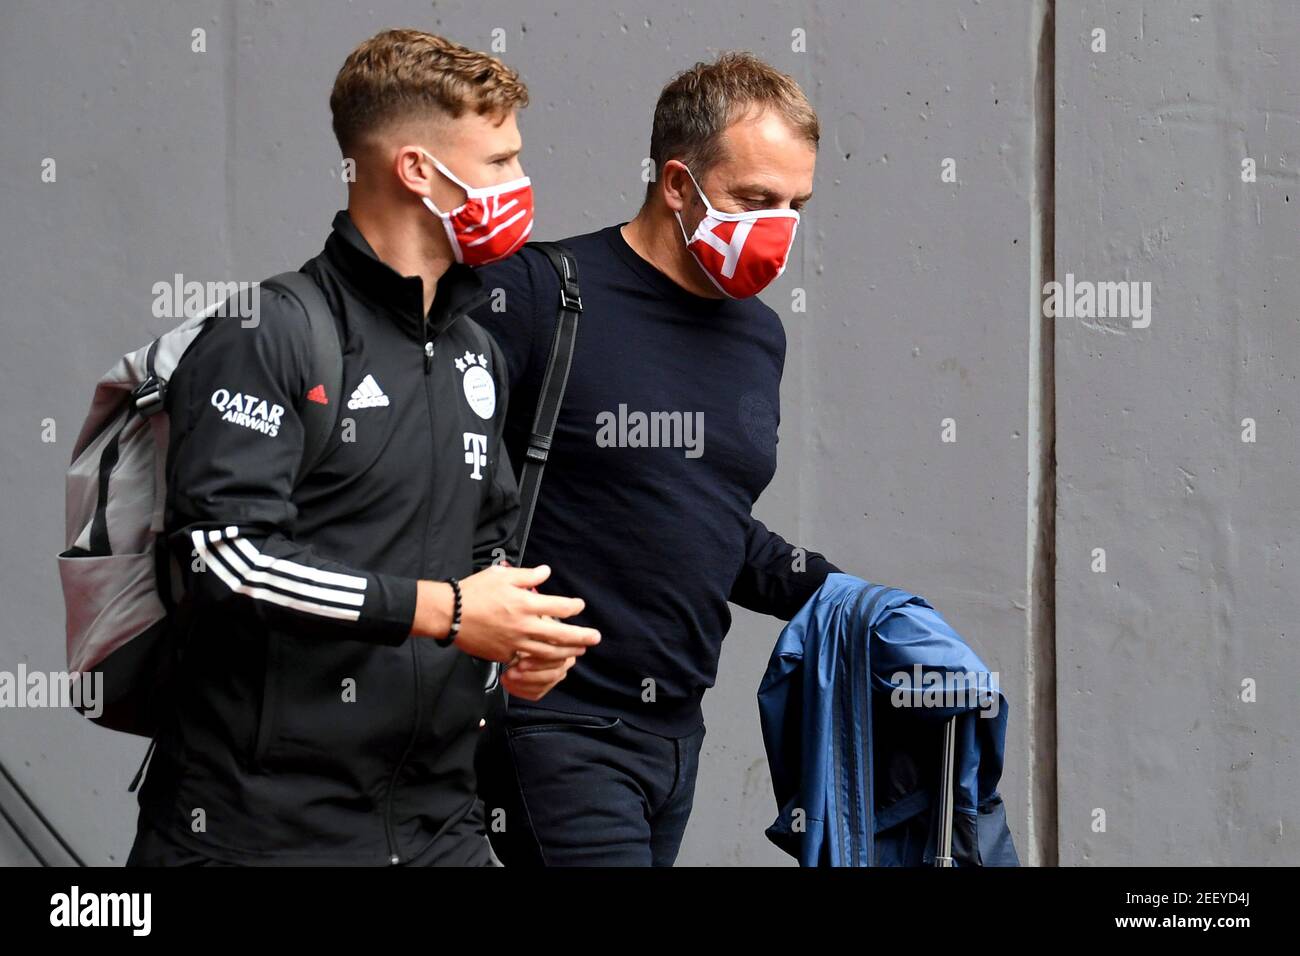 Soccer Football - Bundesliga - Bayern Munich v SC Freiburg - Allianz Arena, Munich, Germany - June 20, 2020 Bayern Munich's Joshua Kimmich and interim coach Hansi Flick wearing protective face masks before the match, following the resumption of play behind closed doors after the outbreak of the coronavirus disease (COVID-19)  Sven Hoppe/Pool via REUTERS  DFL regulations prohibit any use of photographs as image sequences and/or quasi-video Stock Photo